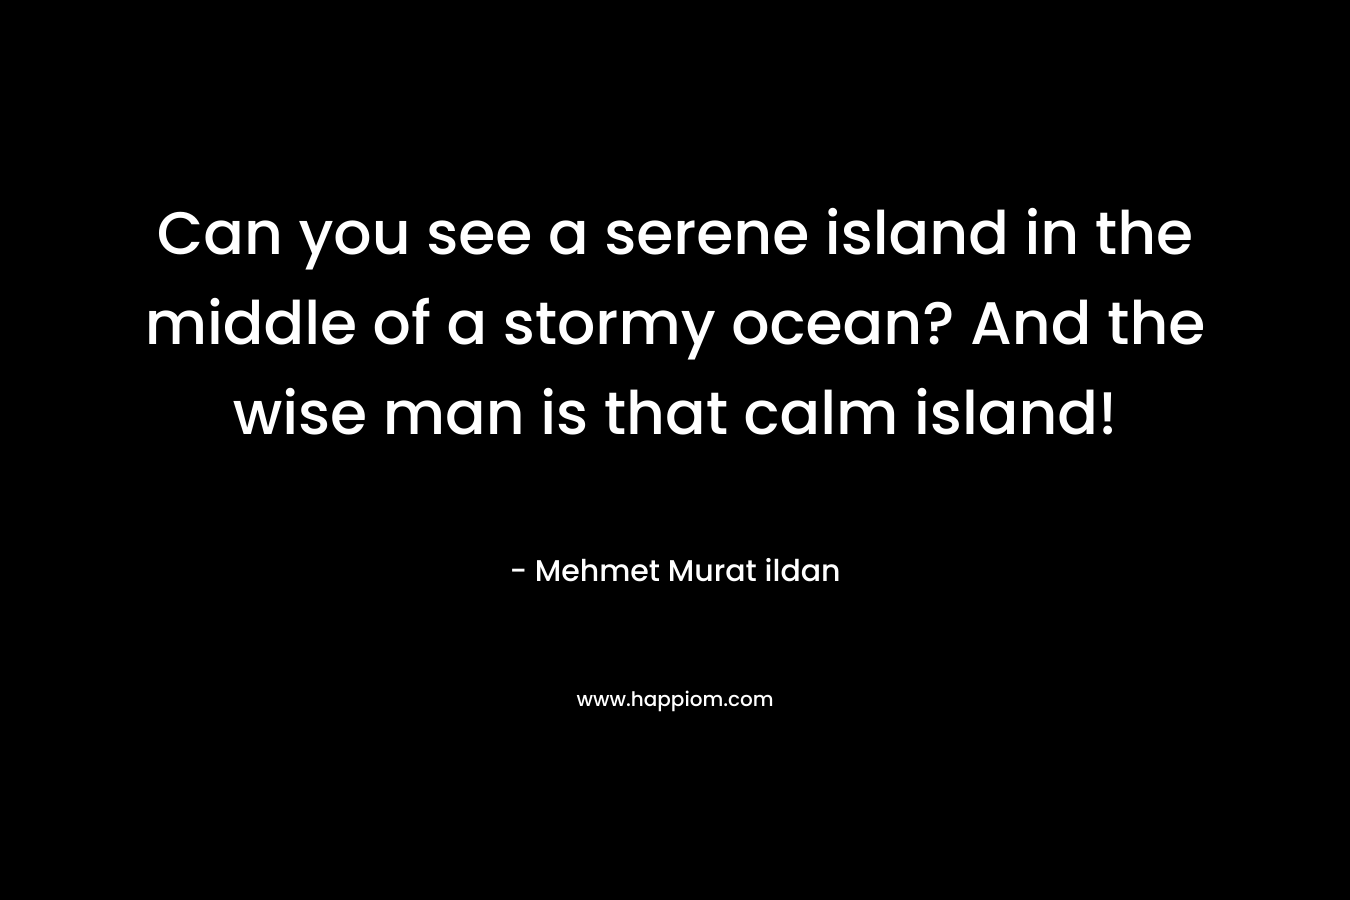 Can you see a serene island in the middle of a stormy ocean? And the wise man is that calm island! – Mehmet Murat ildan